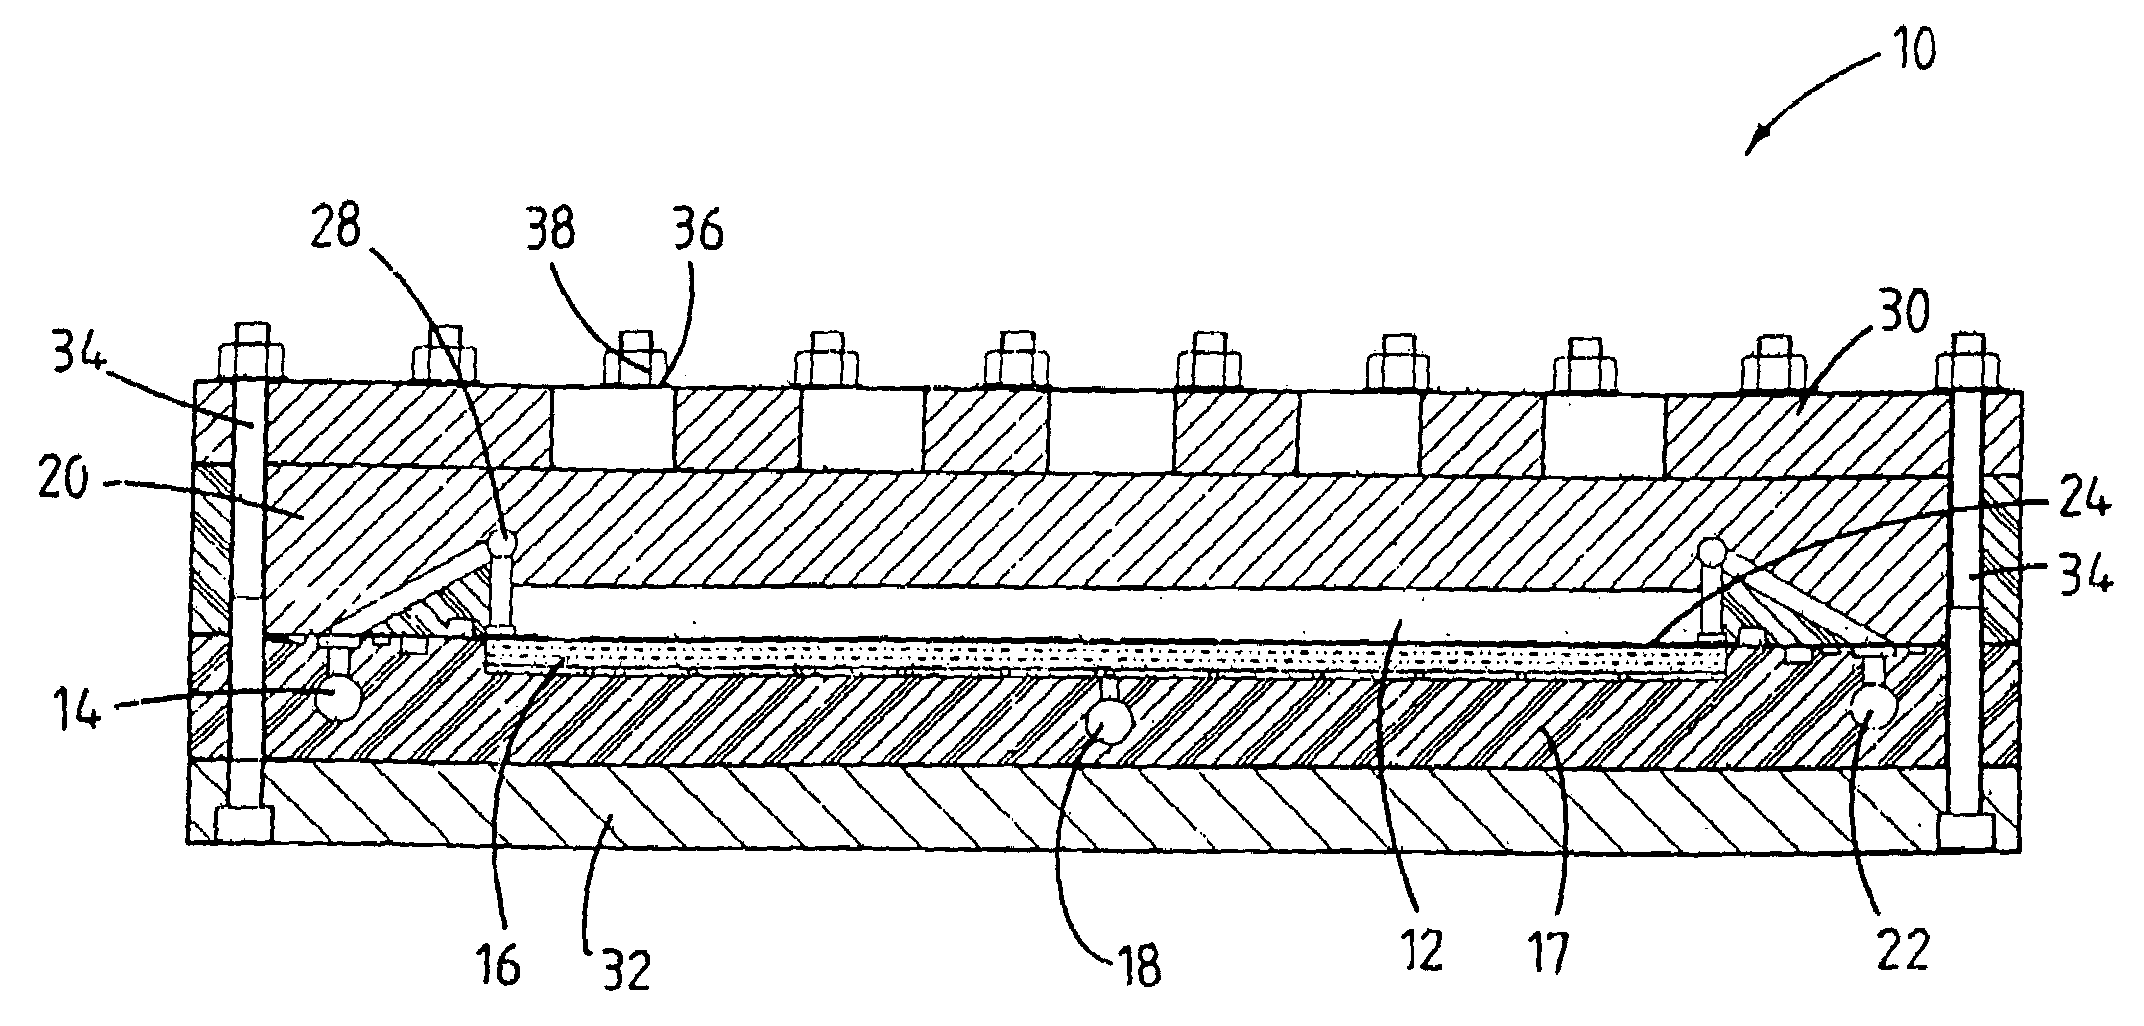 Monitoring unit for monitoring the condition of a semi-permeable membrane